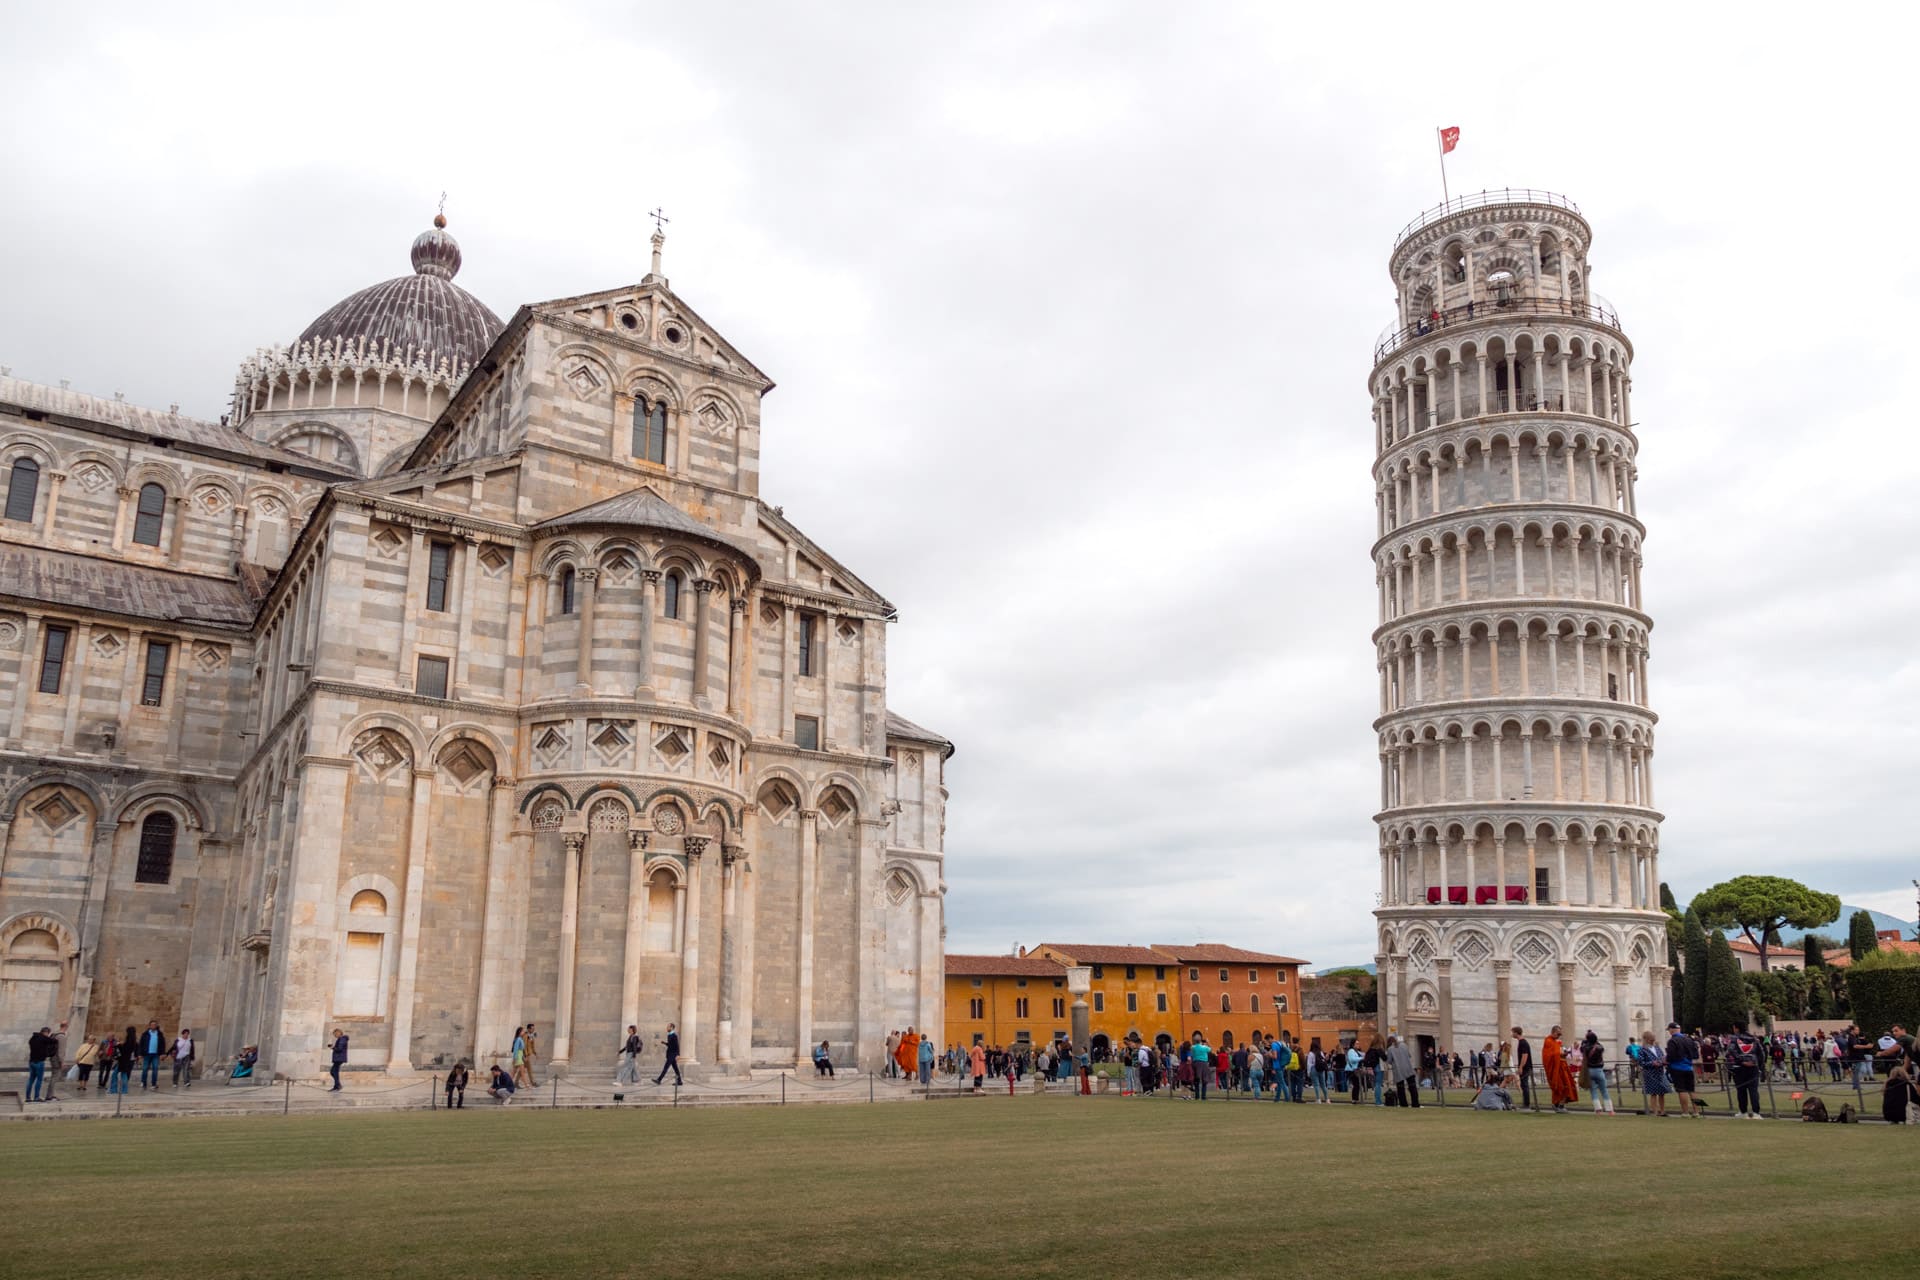 Pisa Travel Guide: 16 Best Things To Do & See